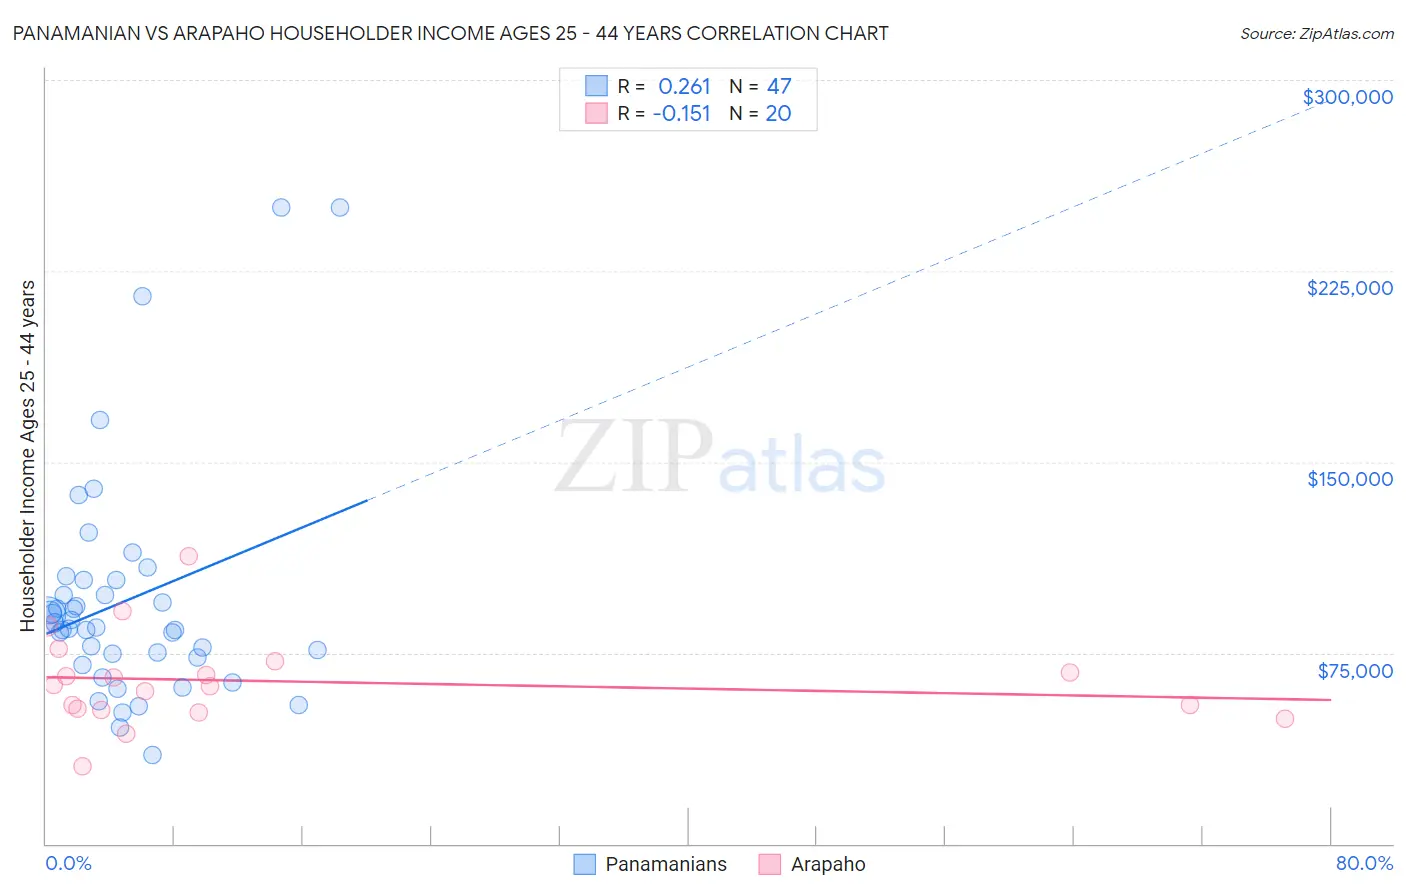 Panamanian vs Arapaho Householder Income Ages 25 - 44 years